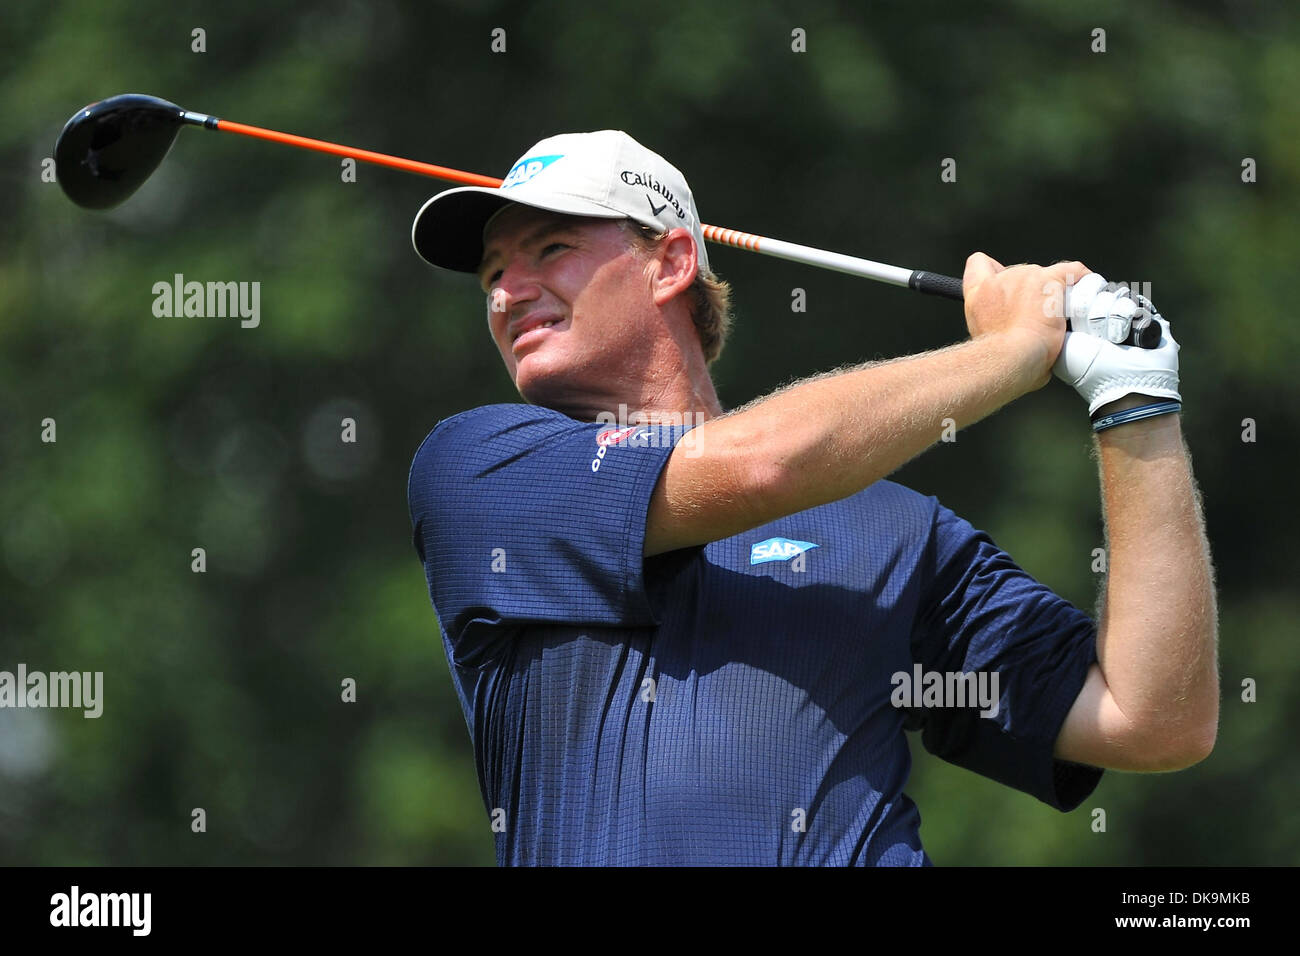 Aug. 26, 2011 - Edison, New Jersey, U.S - South Africa's Ernie Els in second round PGA action during The Barclays at the Plainfield Country Club in Edison New Jersey (Credit Image: © Brooks Von Arx/Southcreek Global/ZUMAPRESS.com) Stock Photo